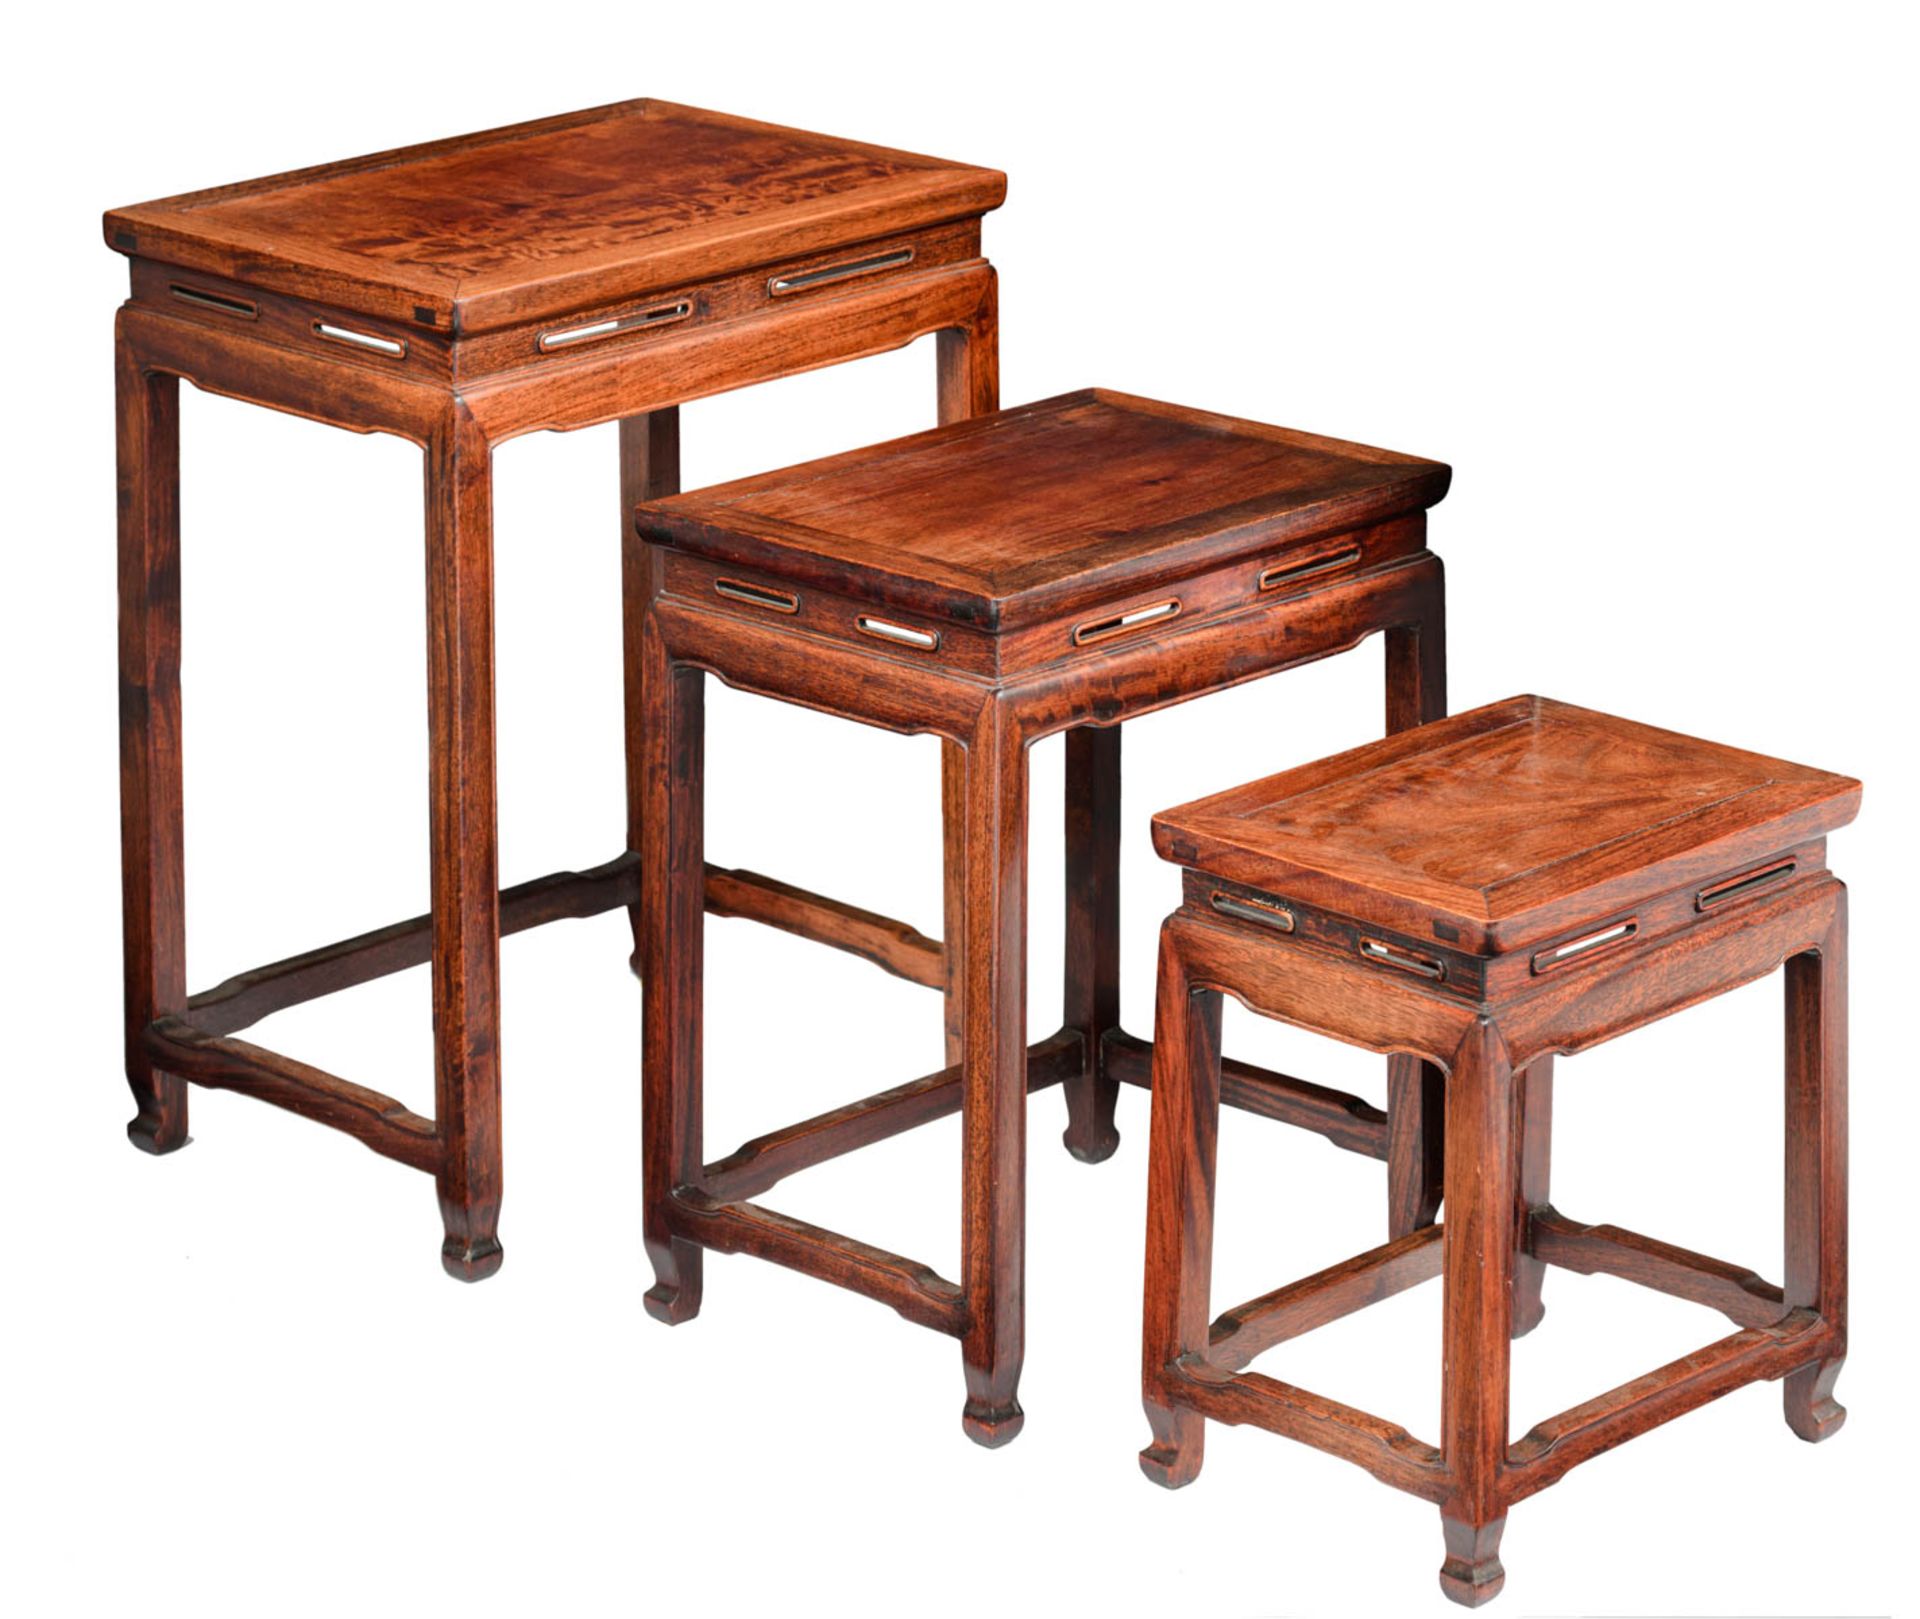 A three piece set of Chinese exotic hardwood matching occasional tables